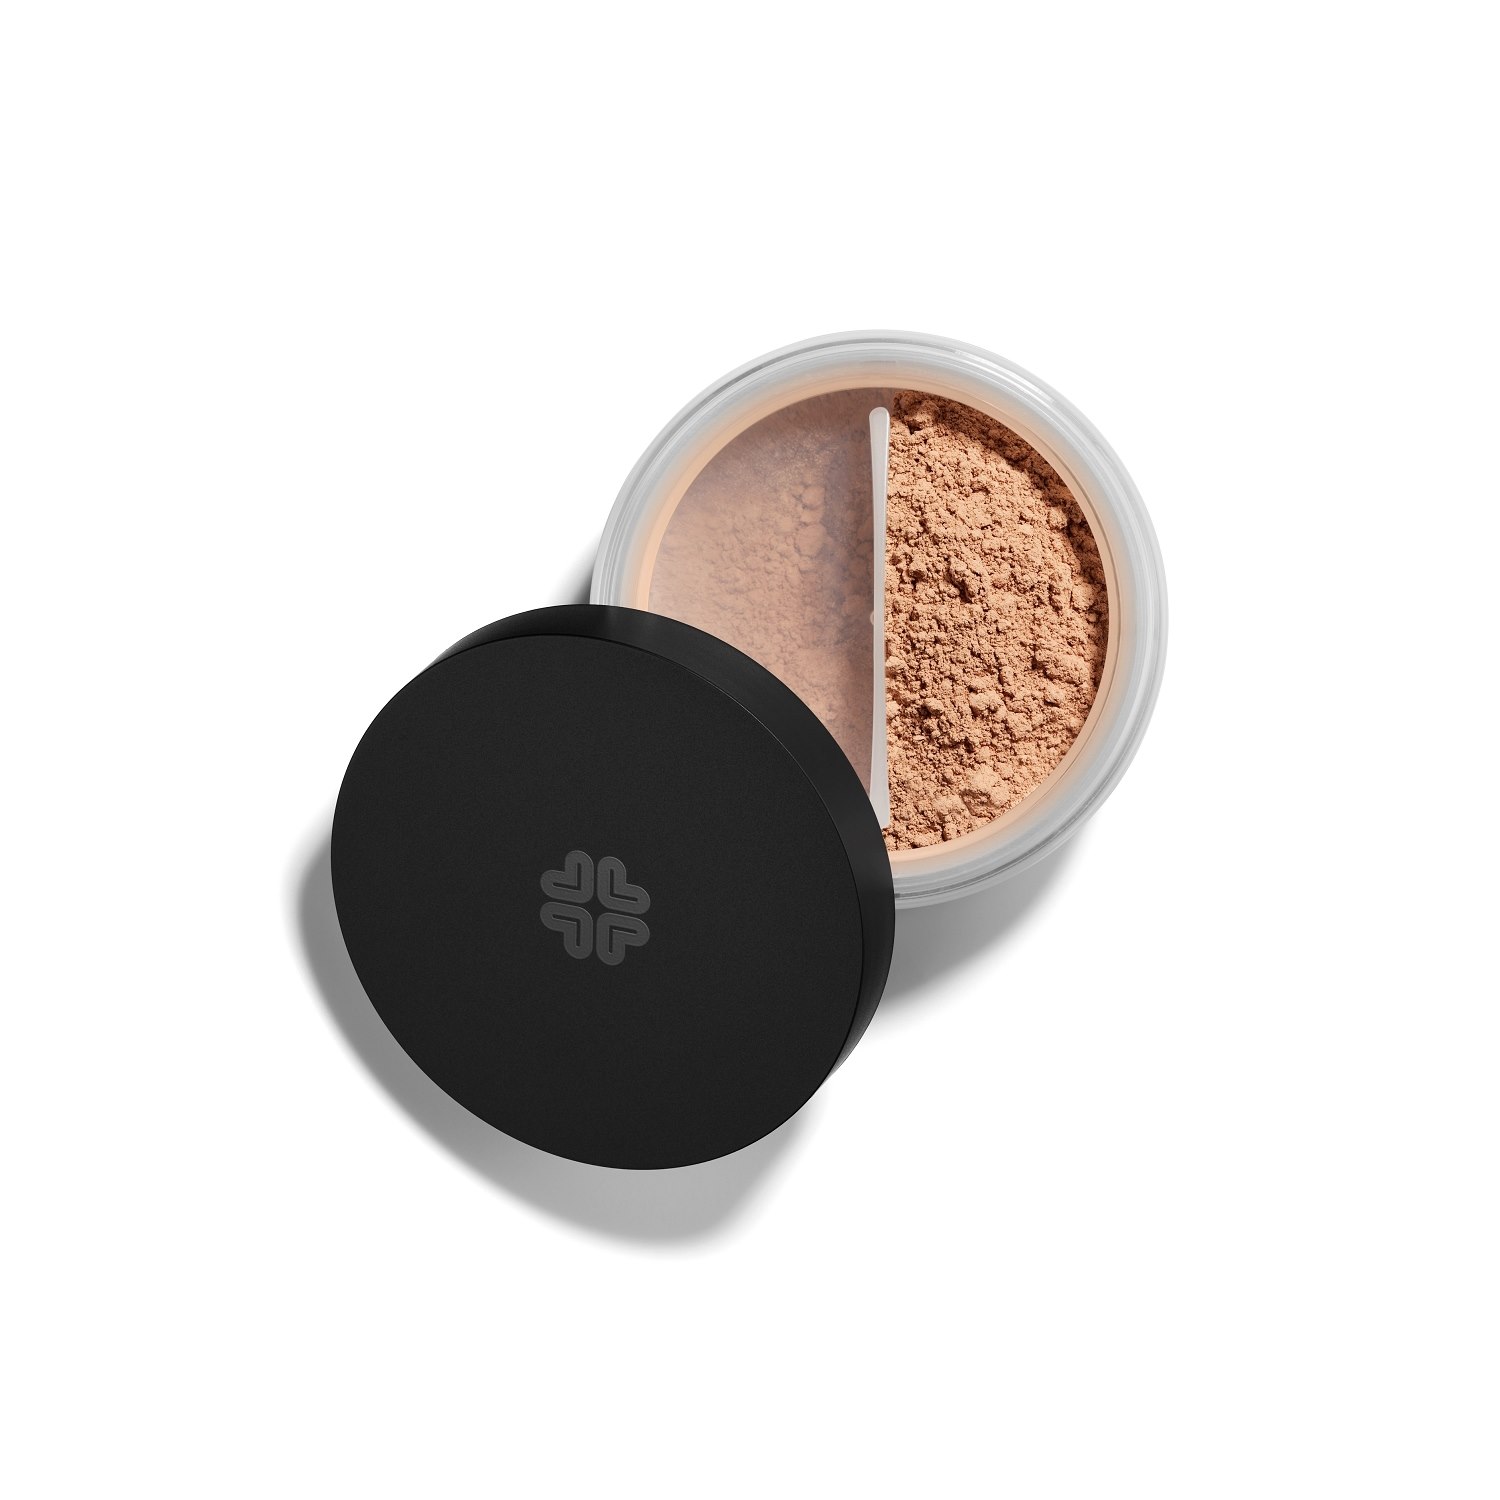 Lily Lolo Mineral Foundation SPF 15, 10 g Cool Caramel